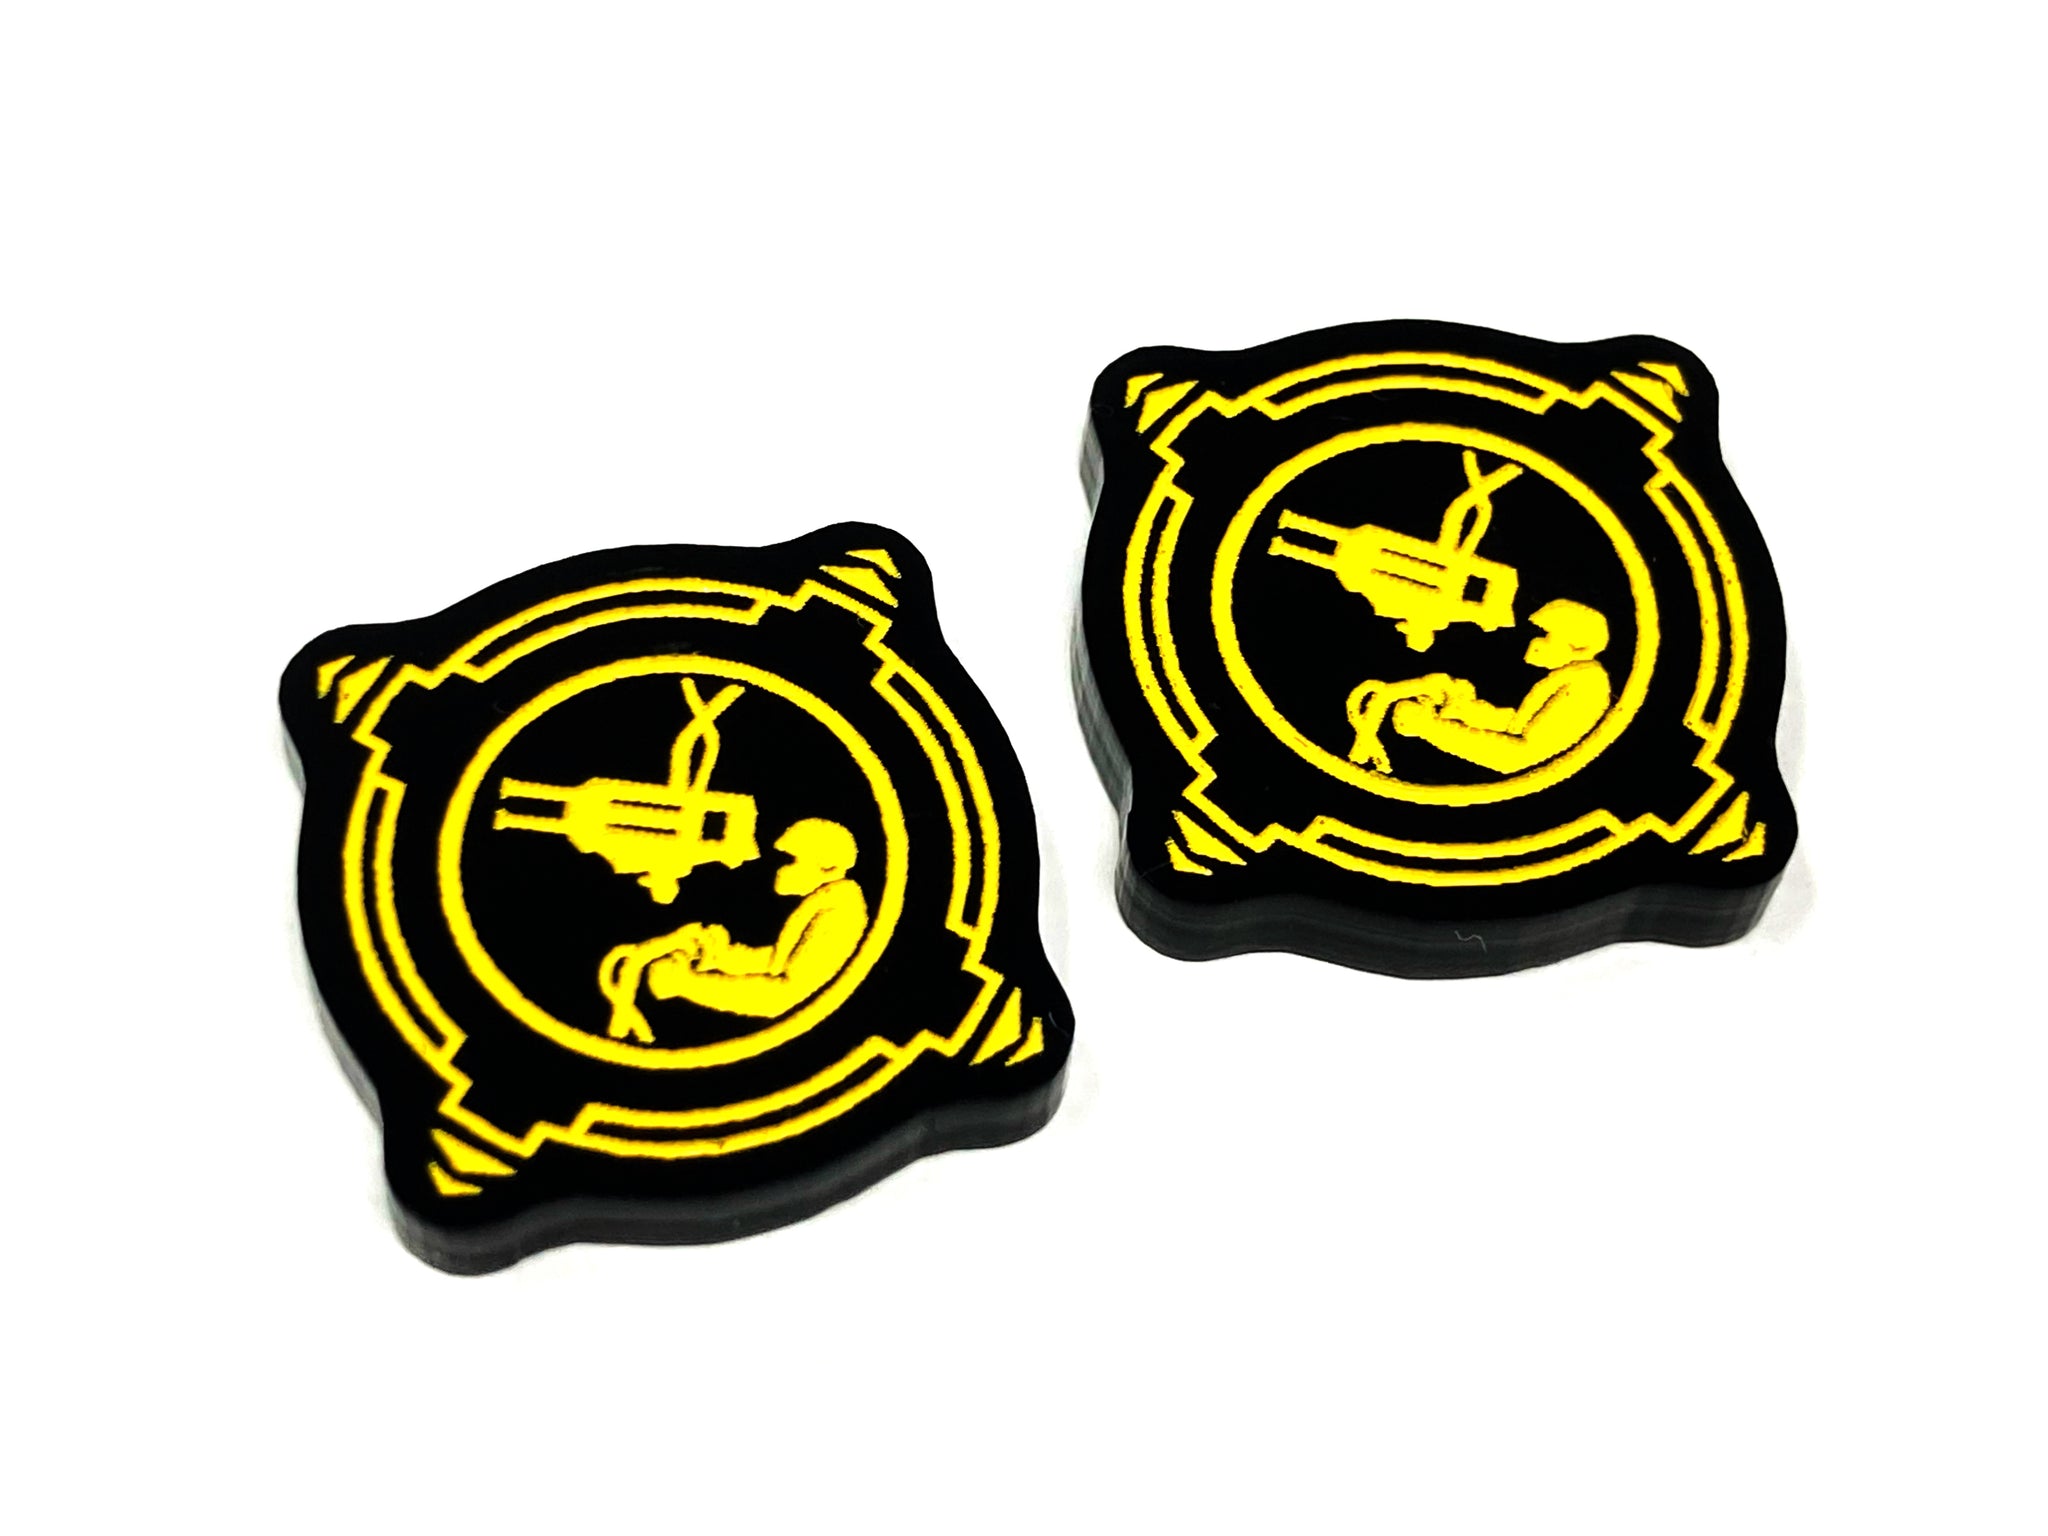 2 x Gunner Charge Tokens - Black Series (Double Sided)